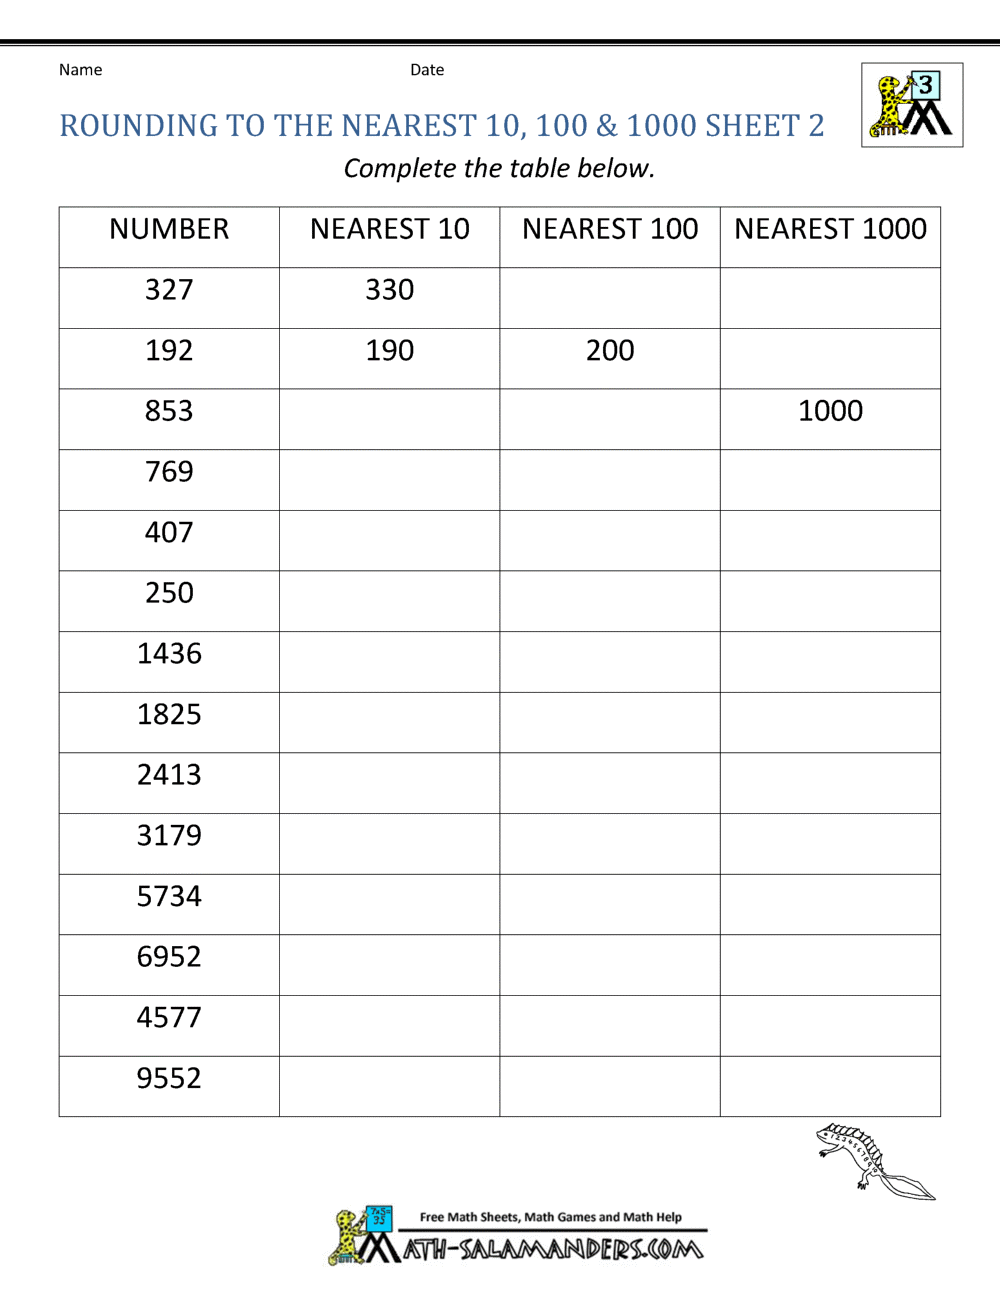 rounding worksheet to the nearest 1000